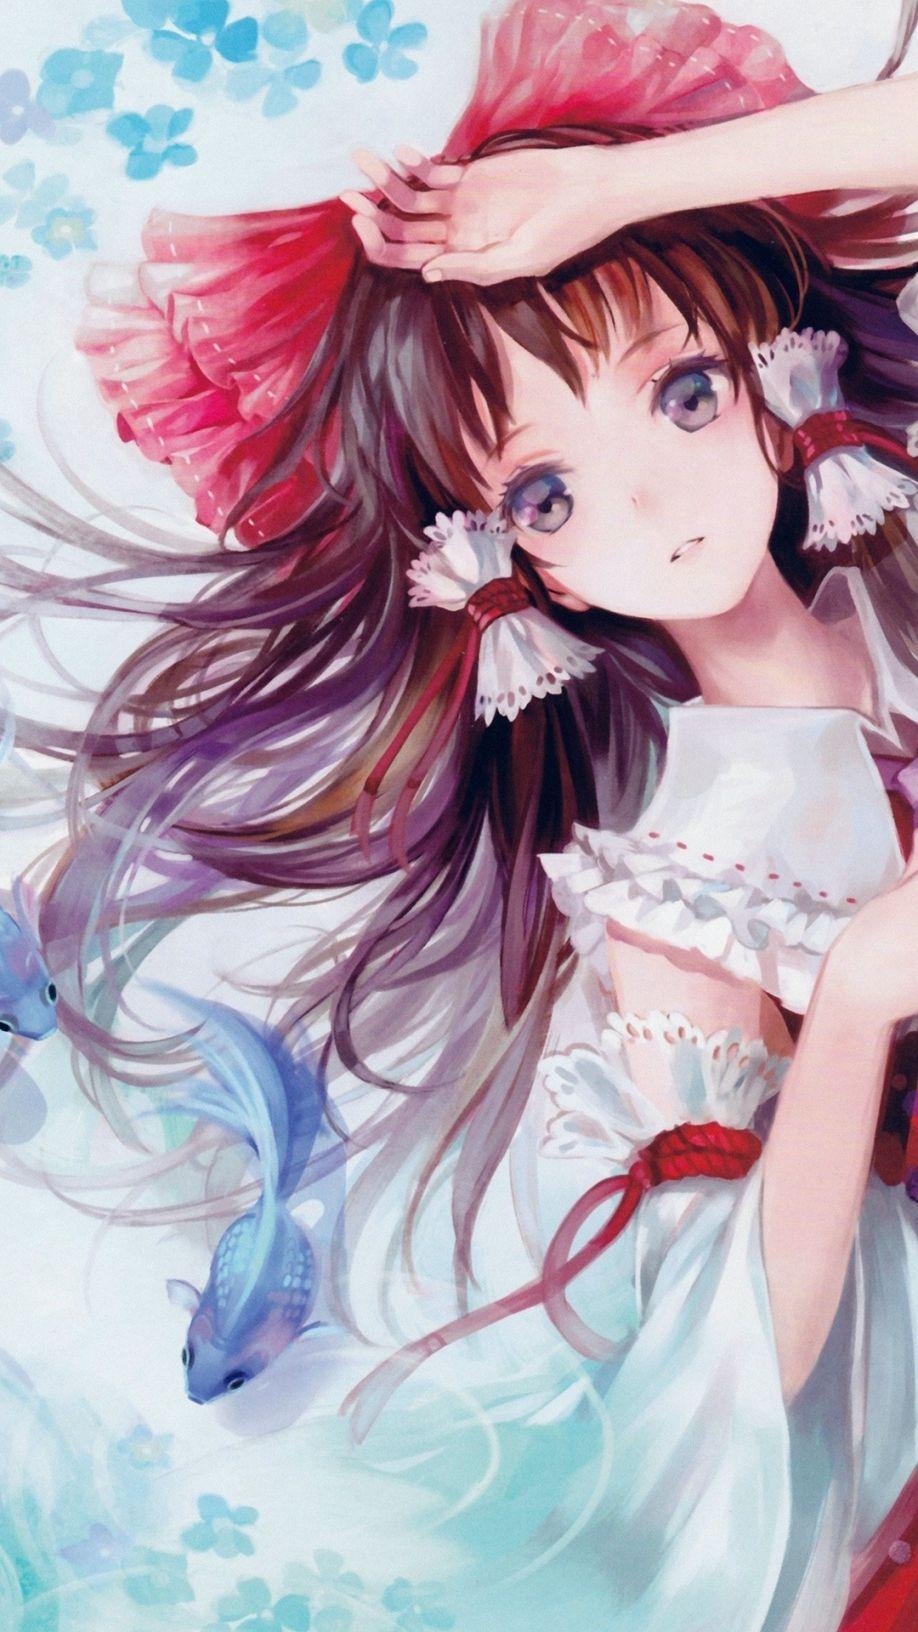 Cute iPhone girl anime wallpaper + Wallpapers Download 2023